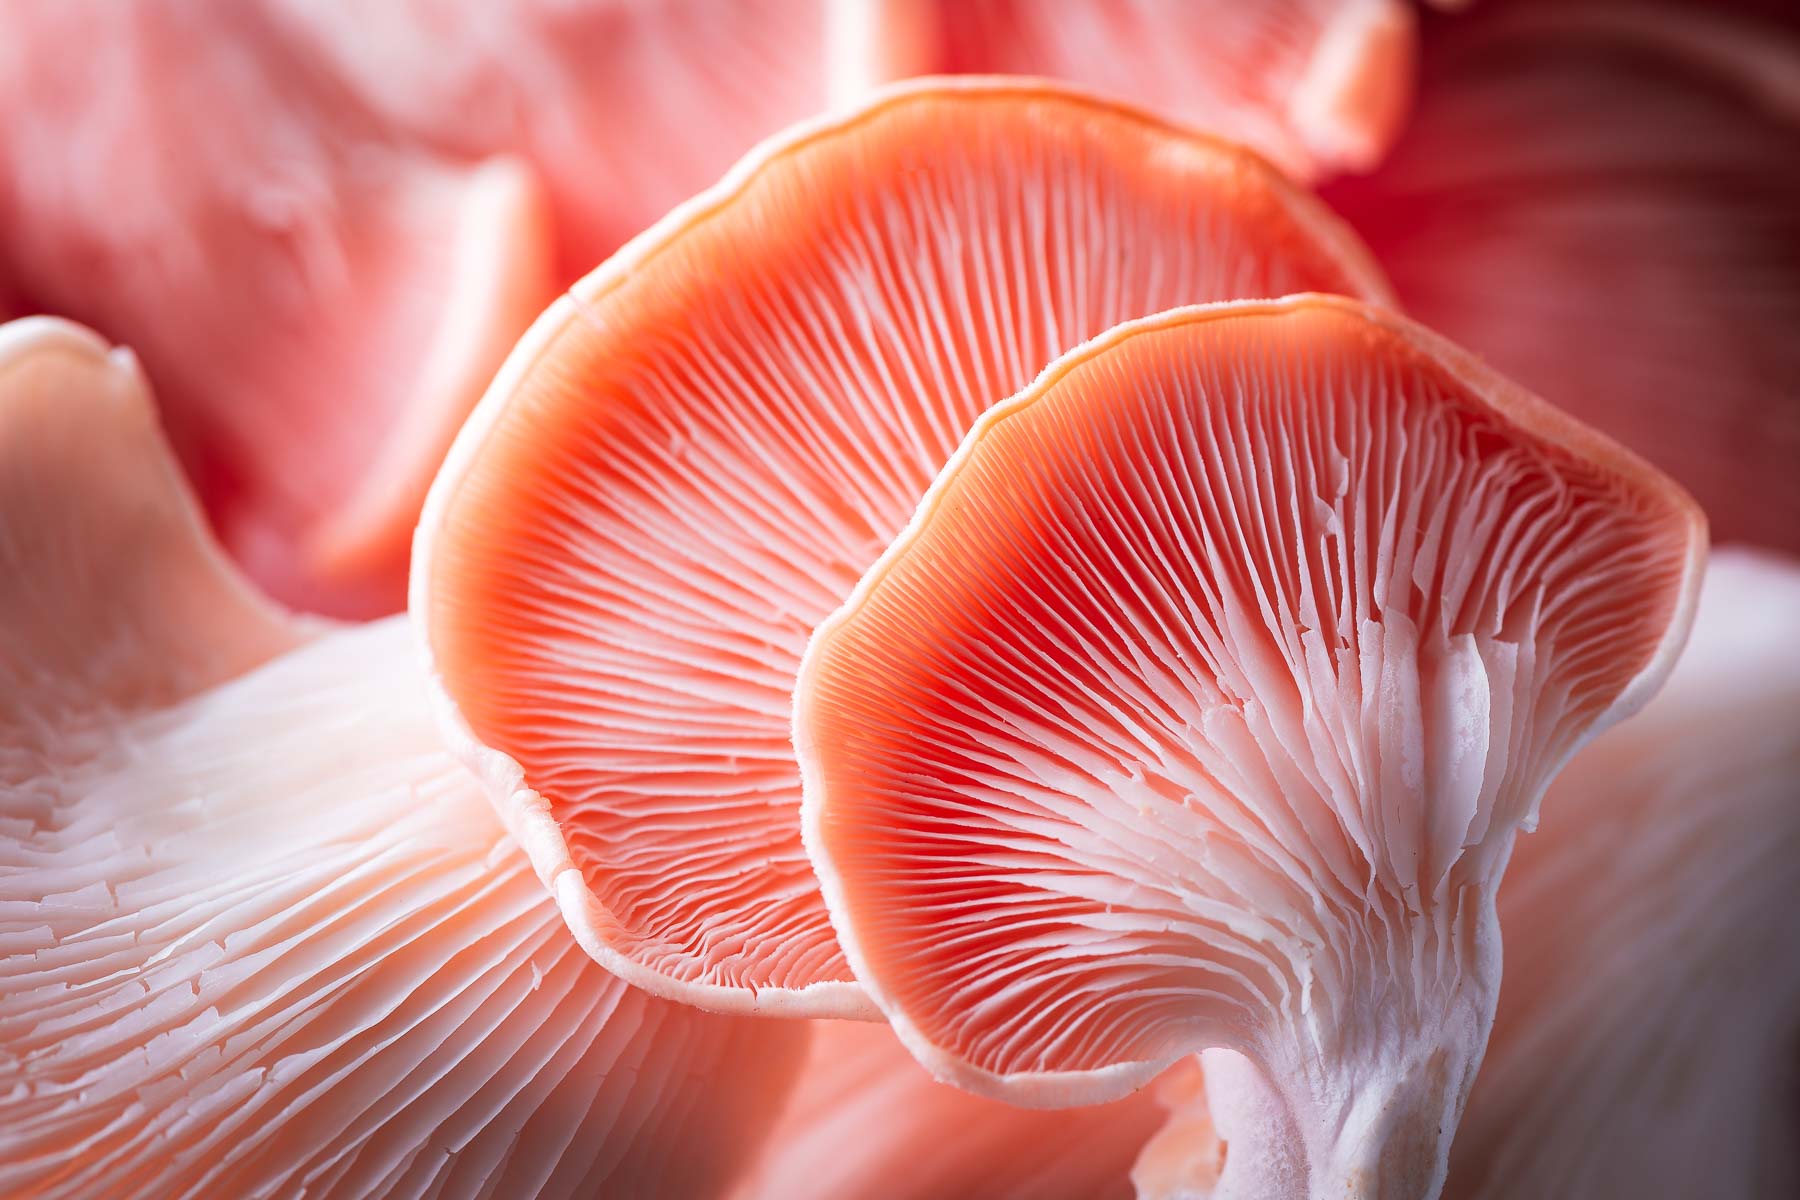 A close-up of pink oyster mushrooms showing their delicate gills.